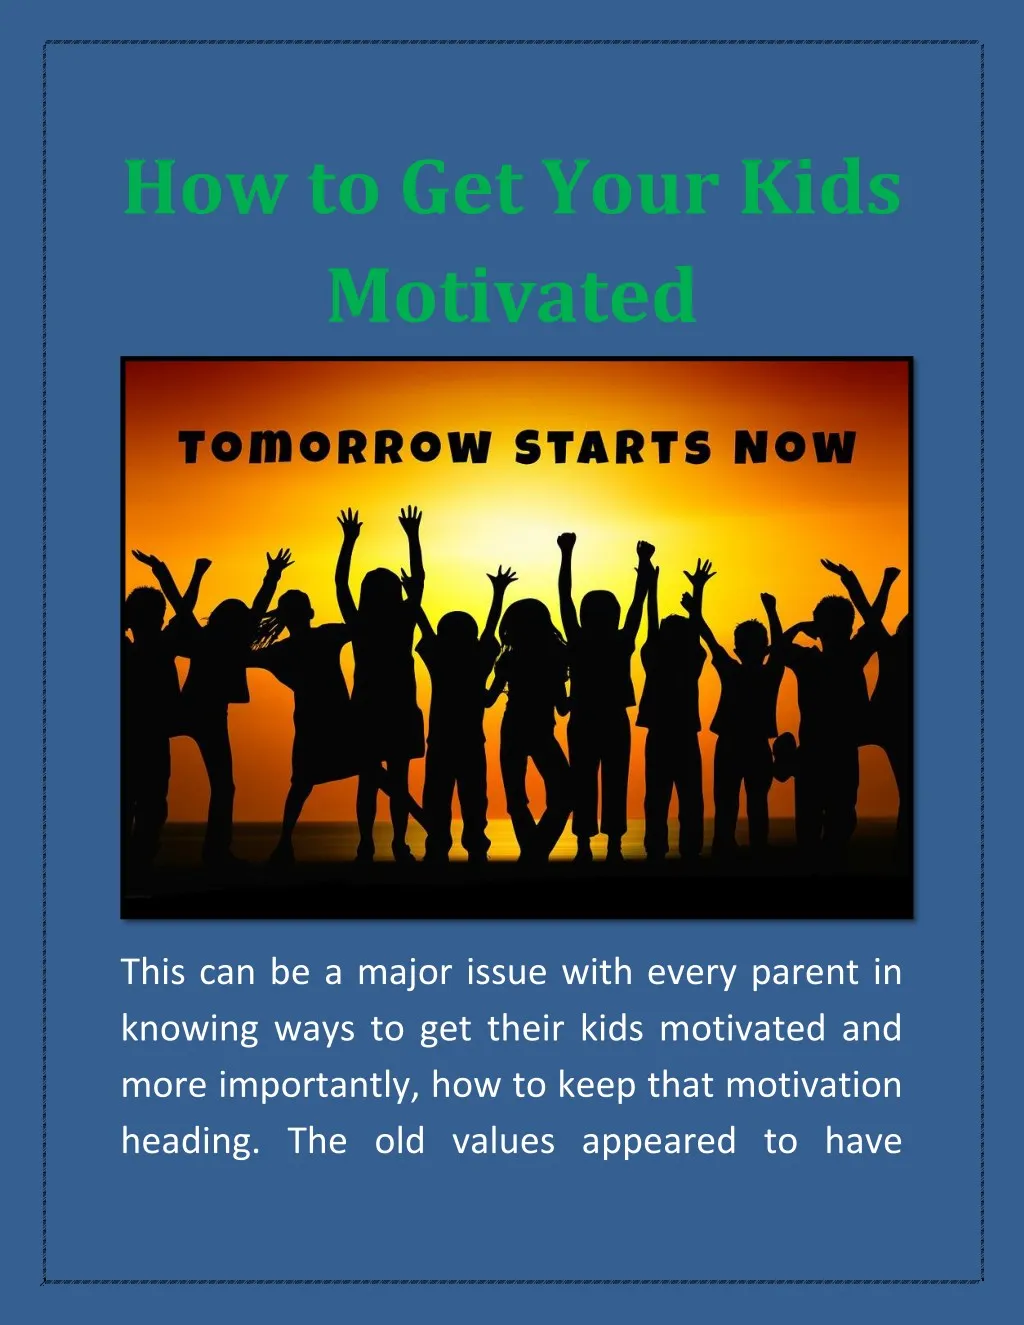 how to get your kids motivated